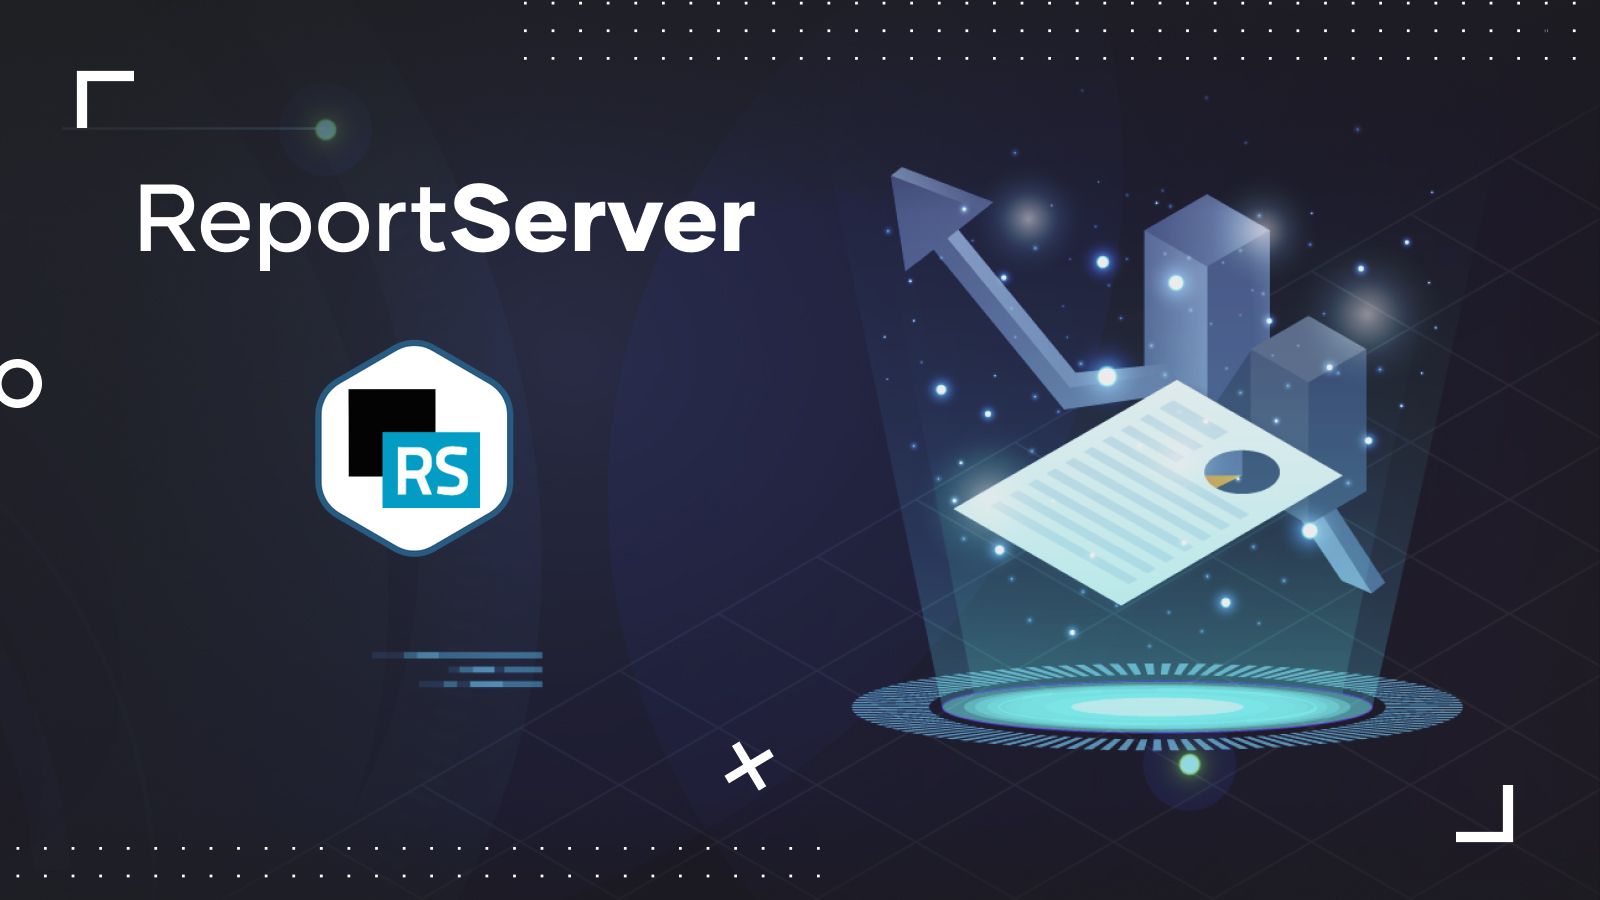 How to show complex data visual representation using ReportServer - Featured image